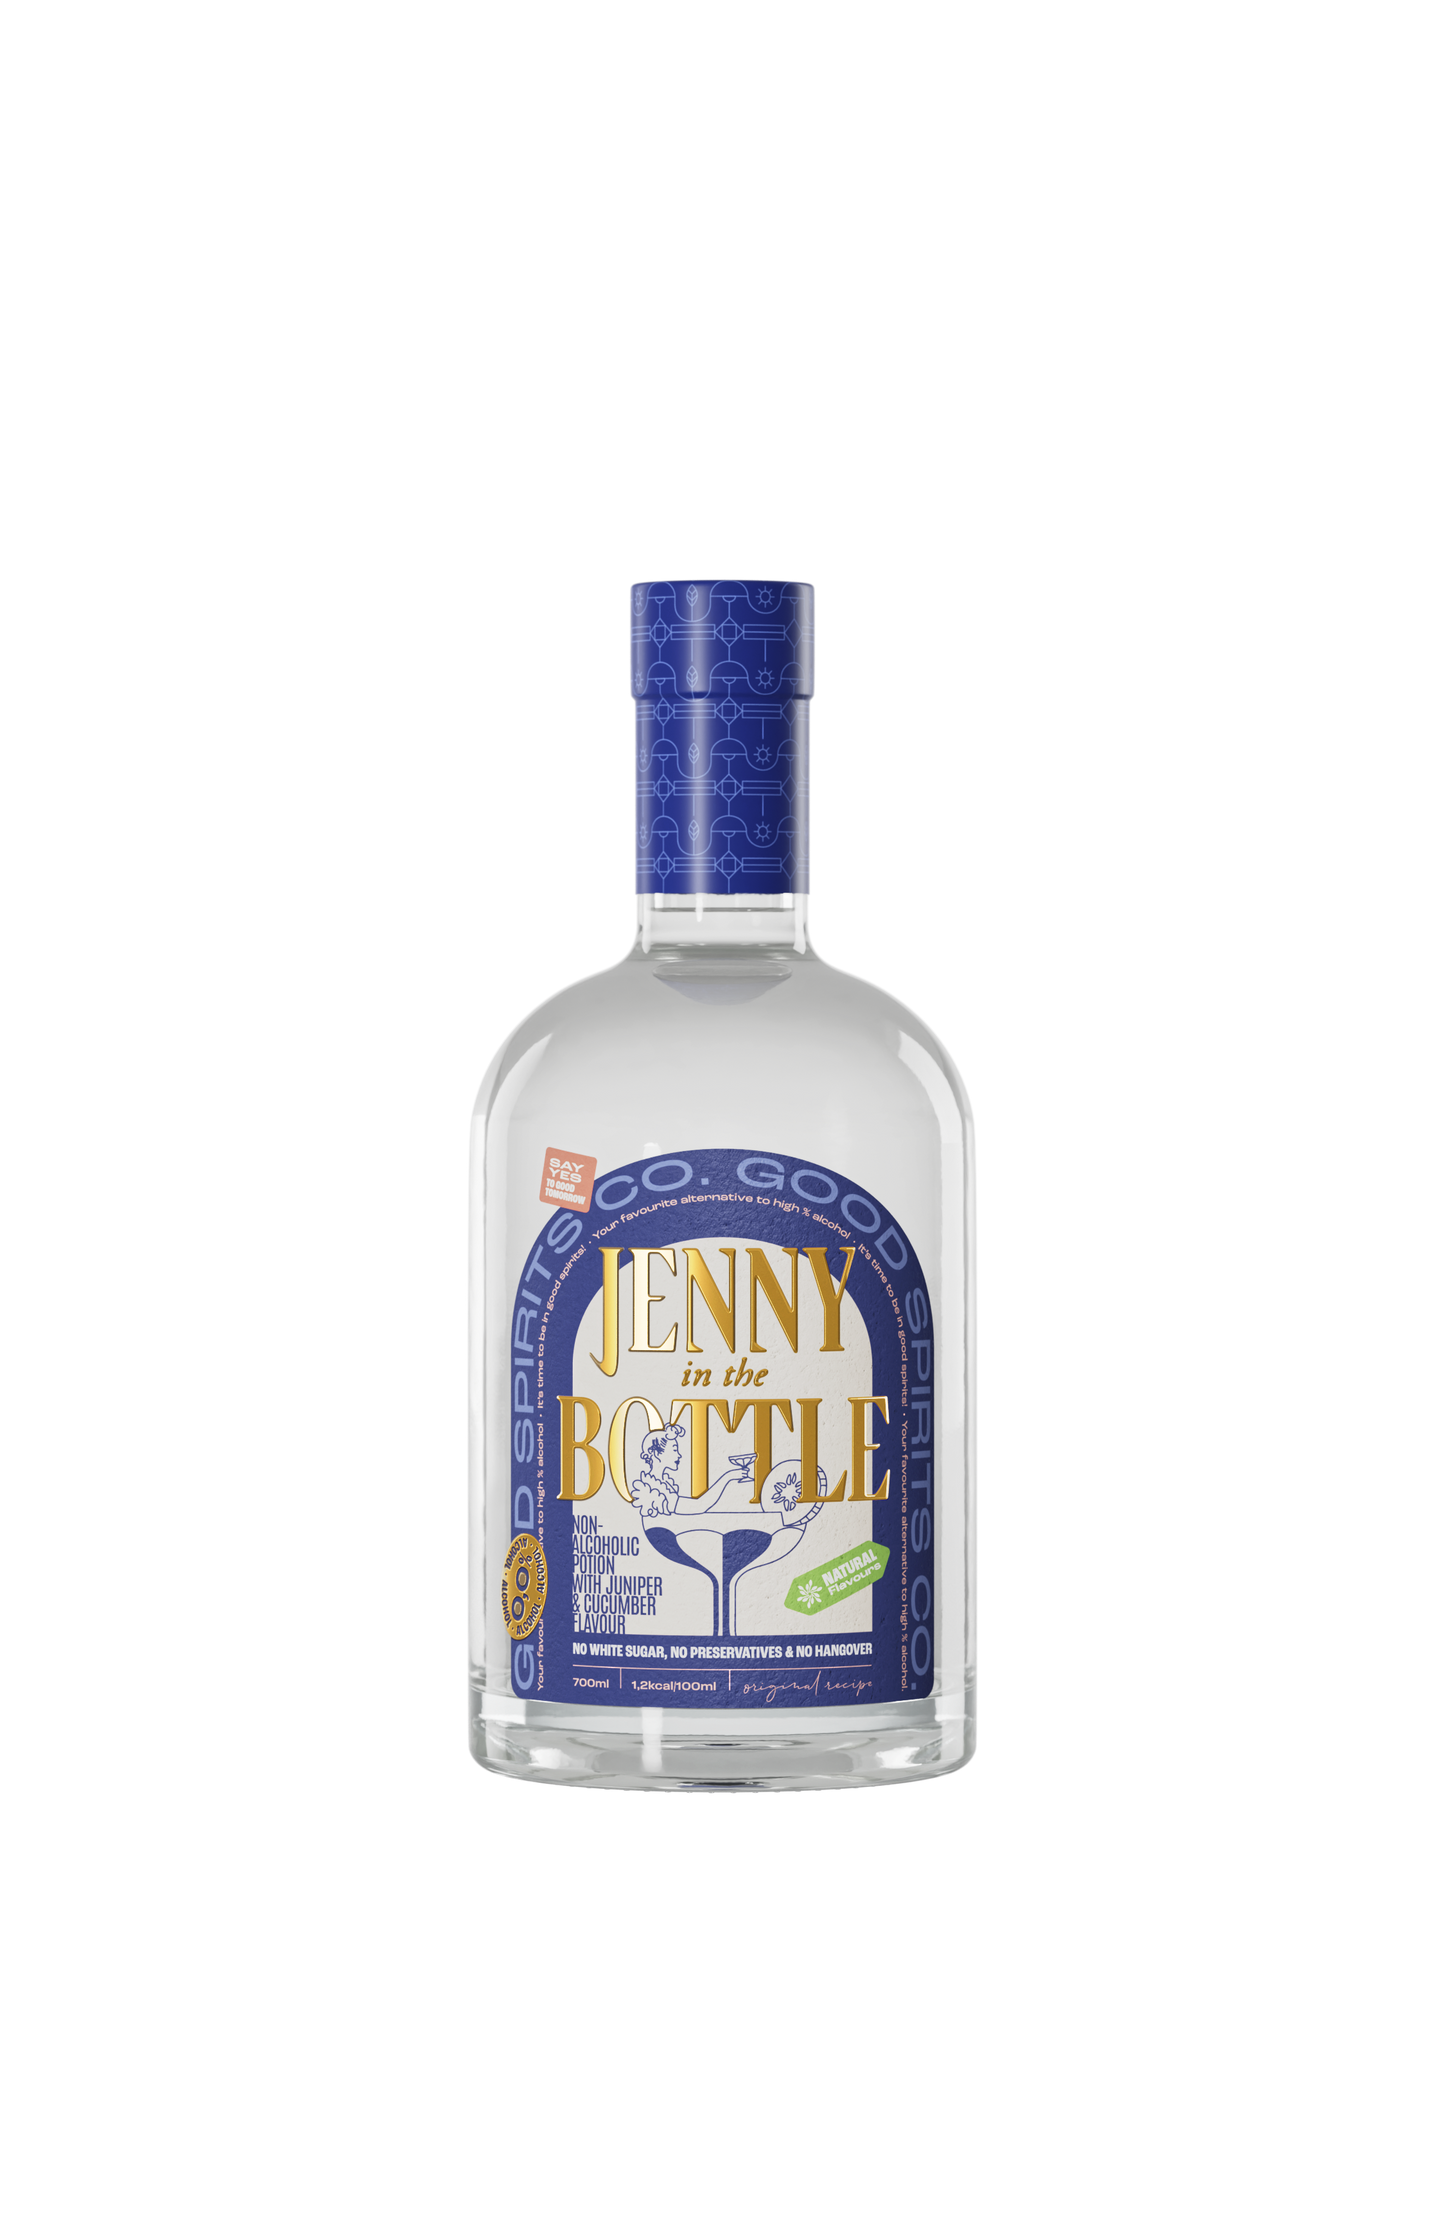 Jenny in the Bottle non-alcoholic gin